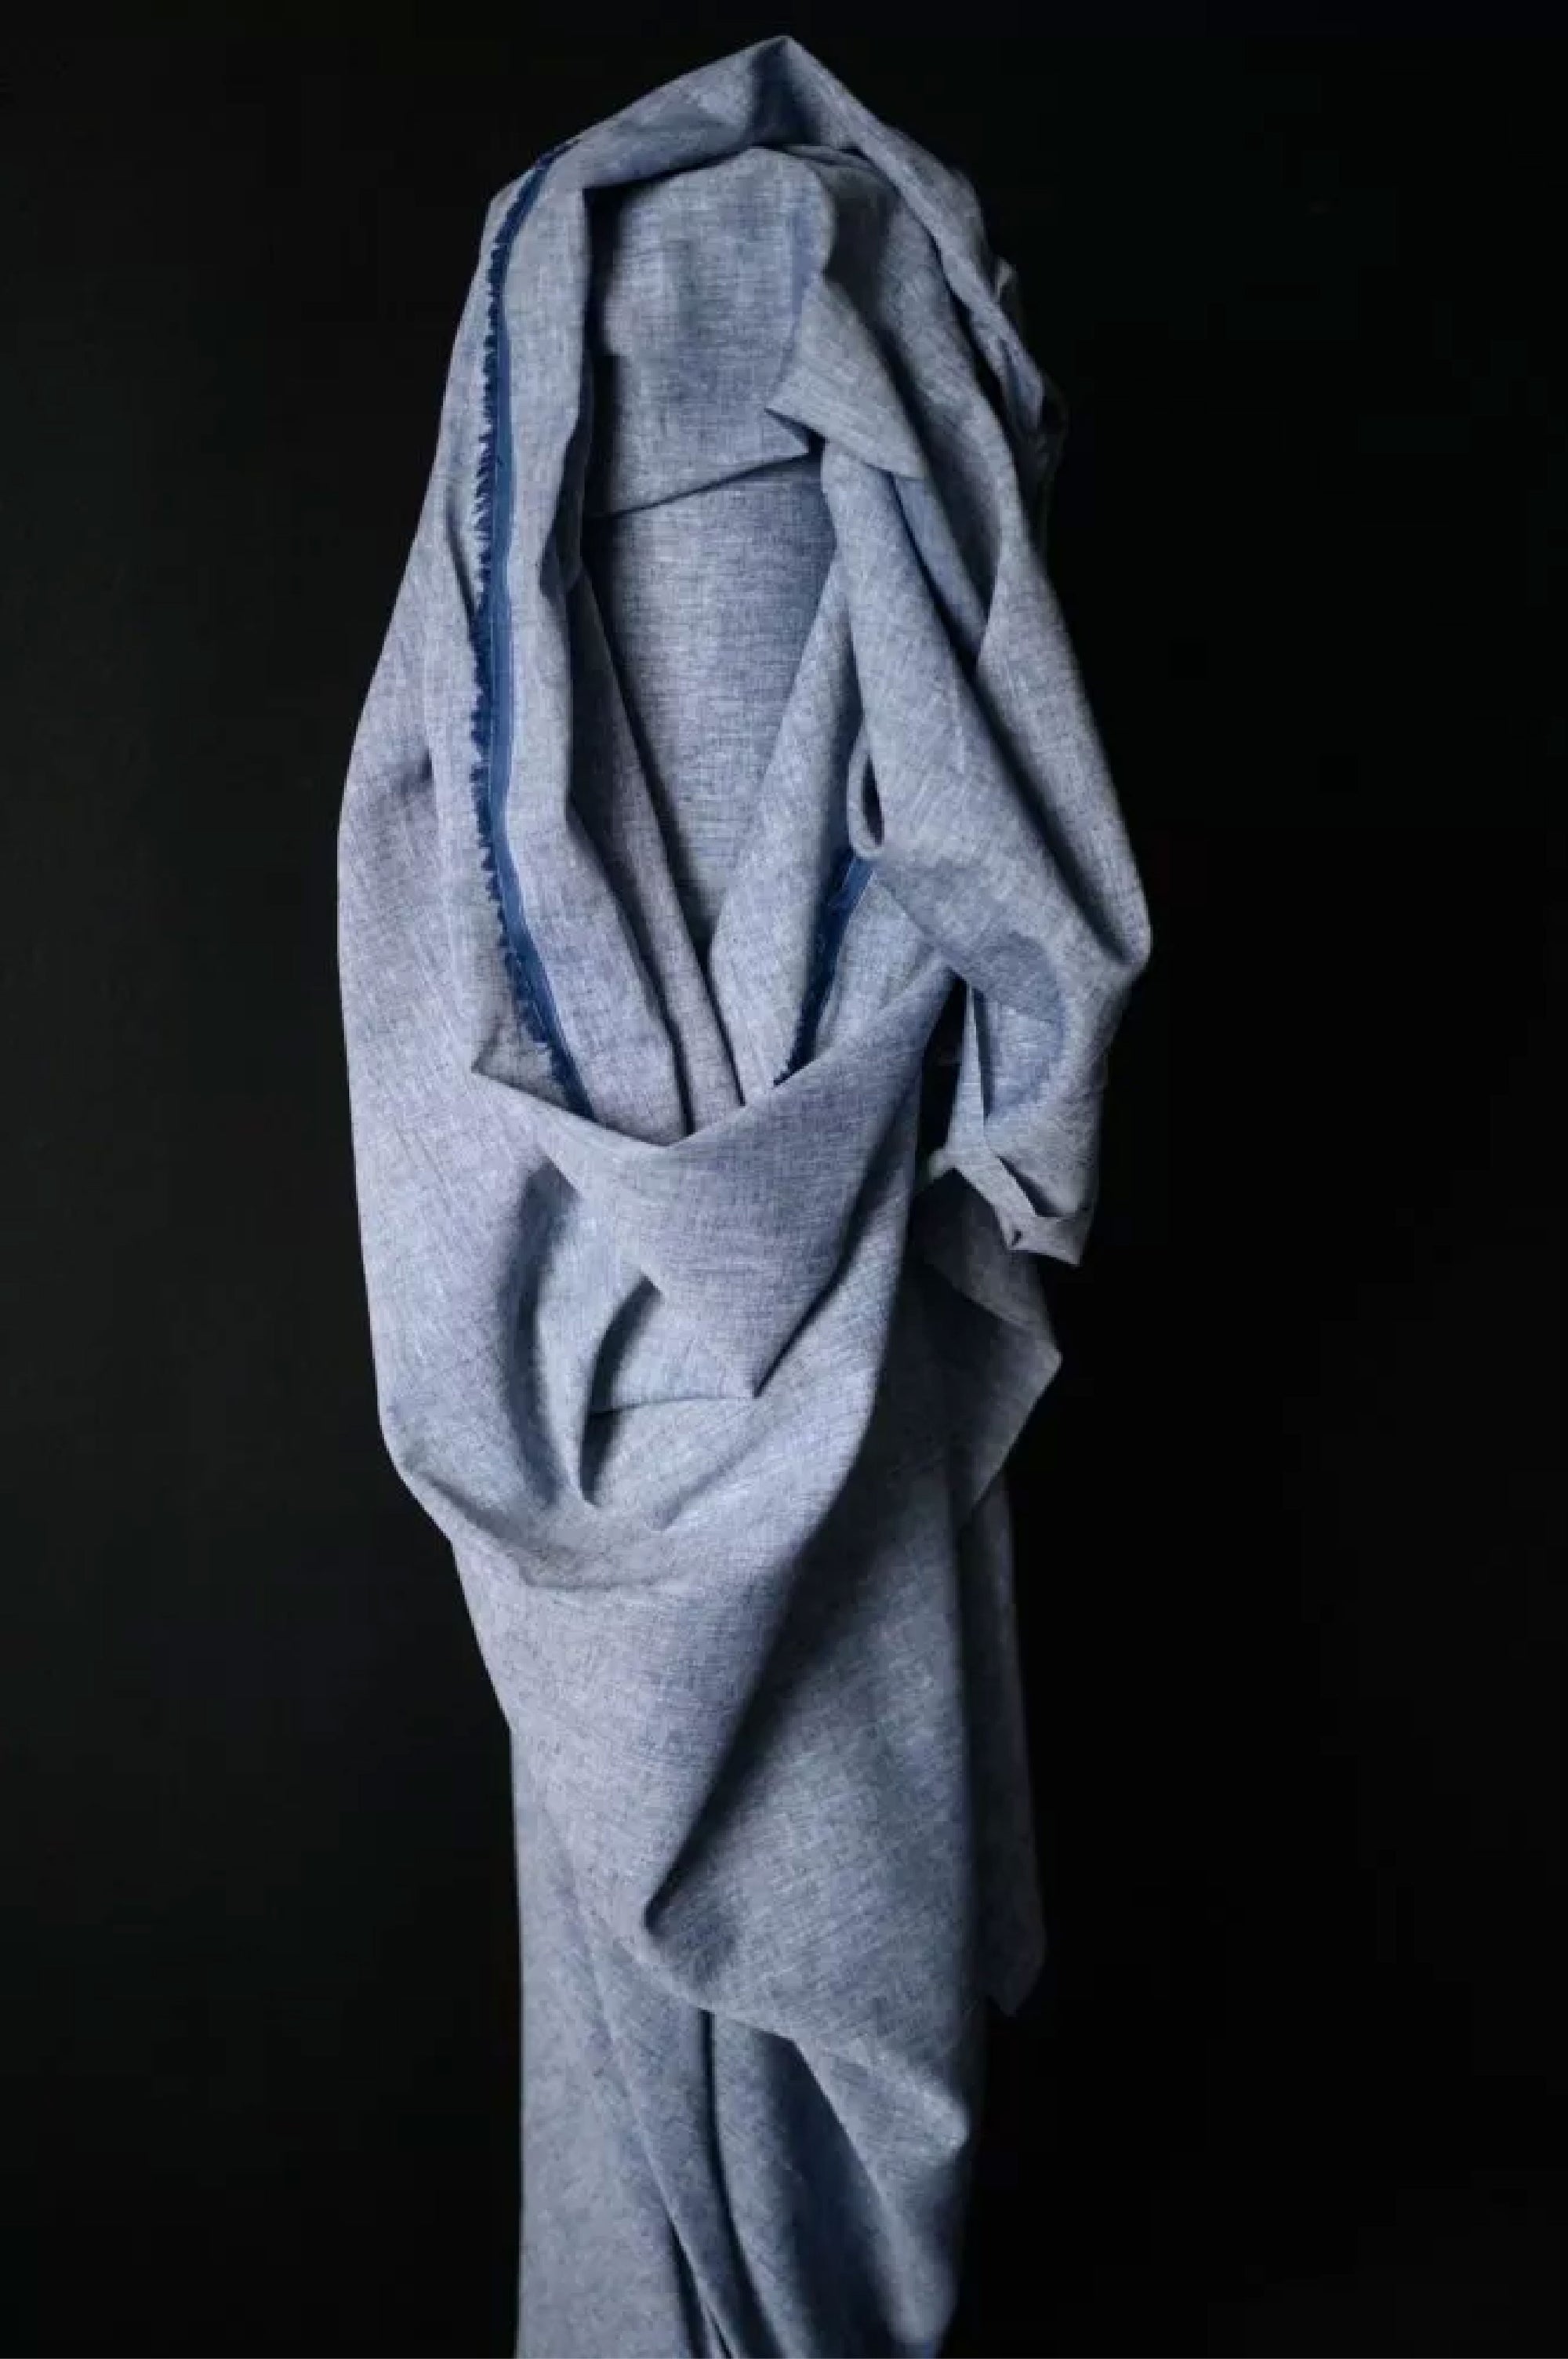 A roll of classic denim bright blue chambray on a dark navy background.